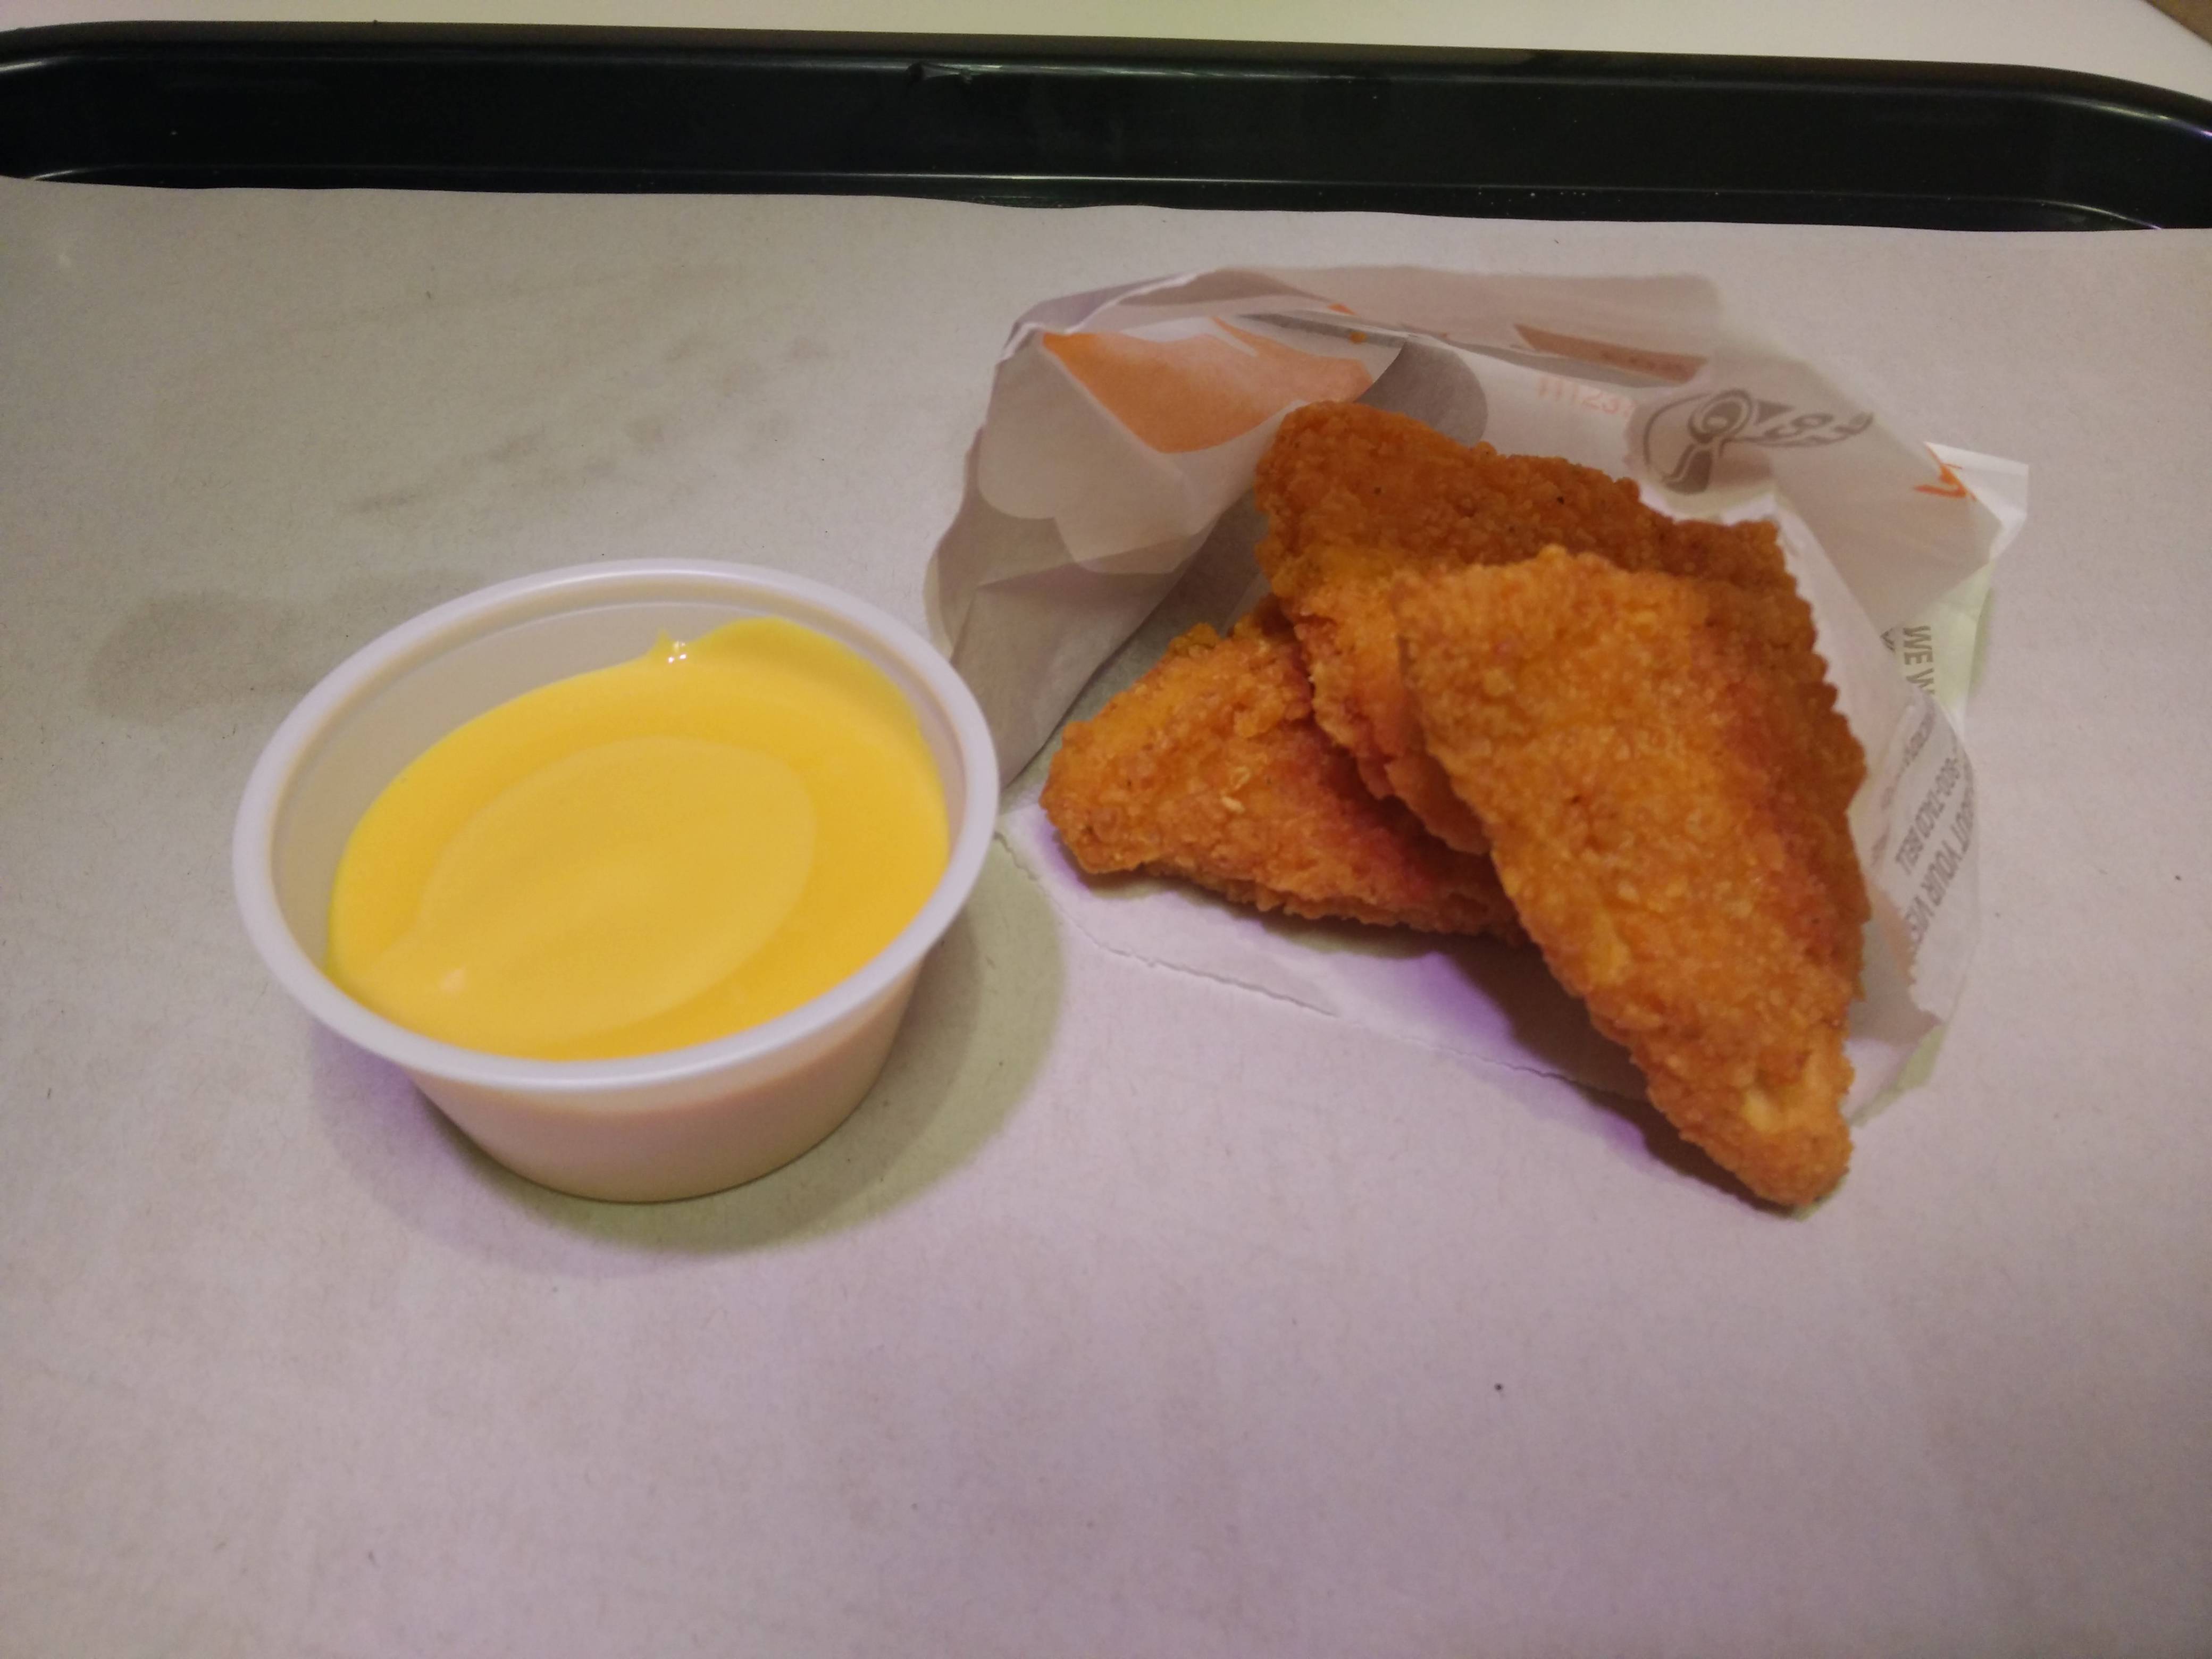 Triangle-shaped fried chicken nuggets from Taco Bell